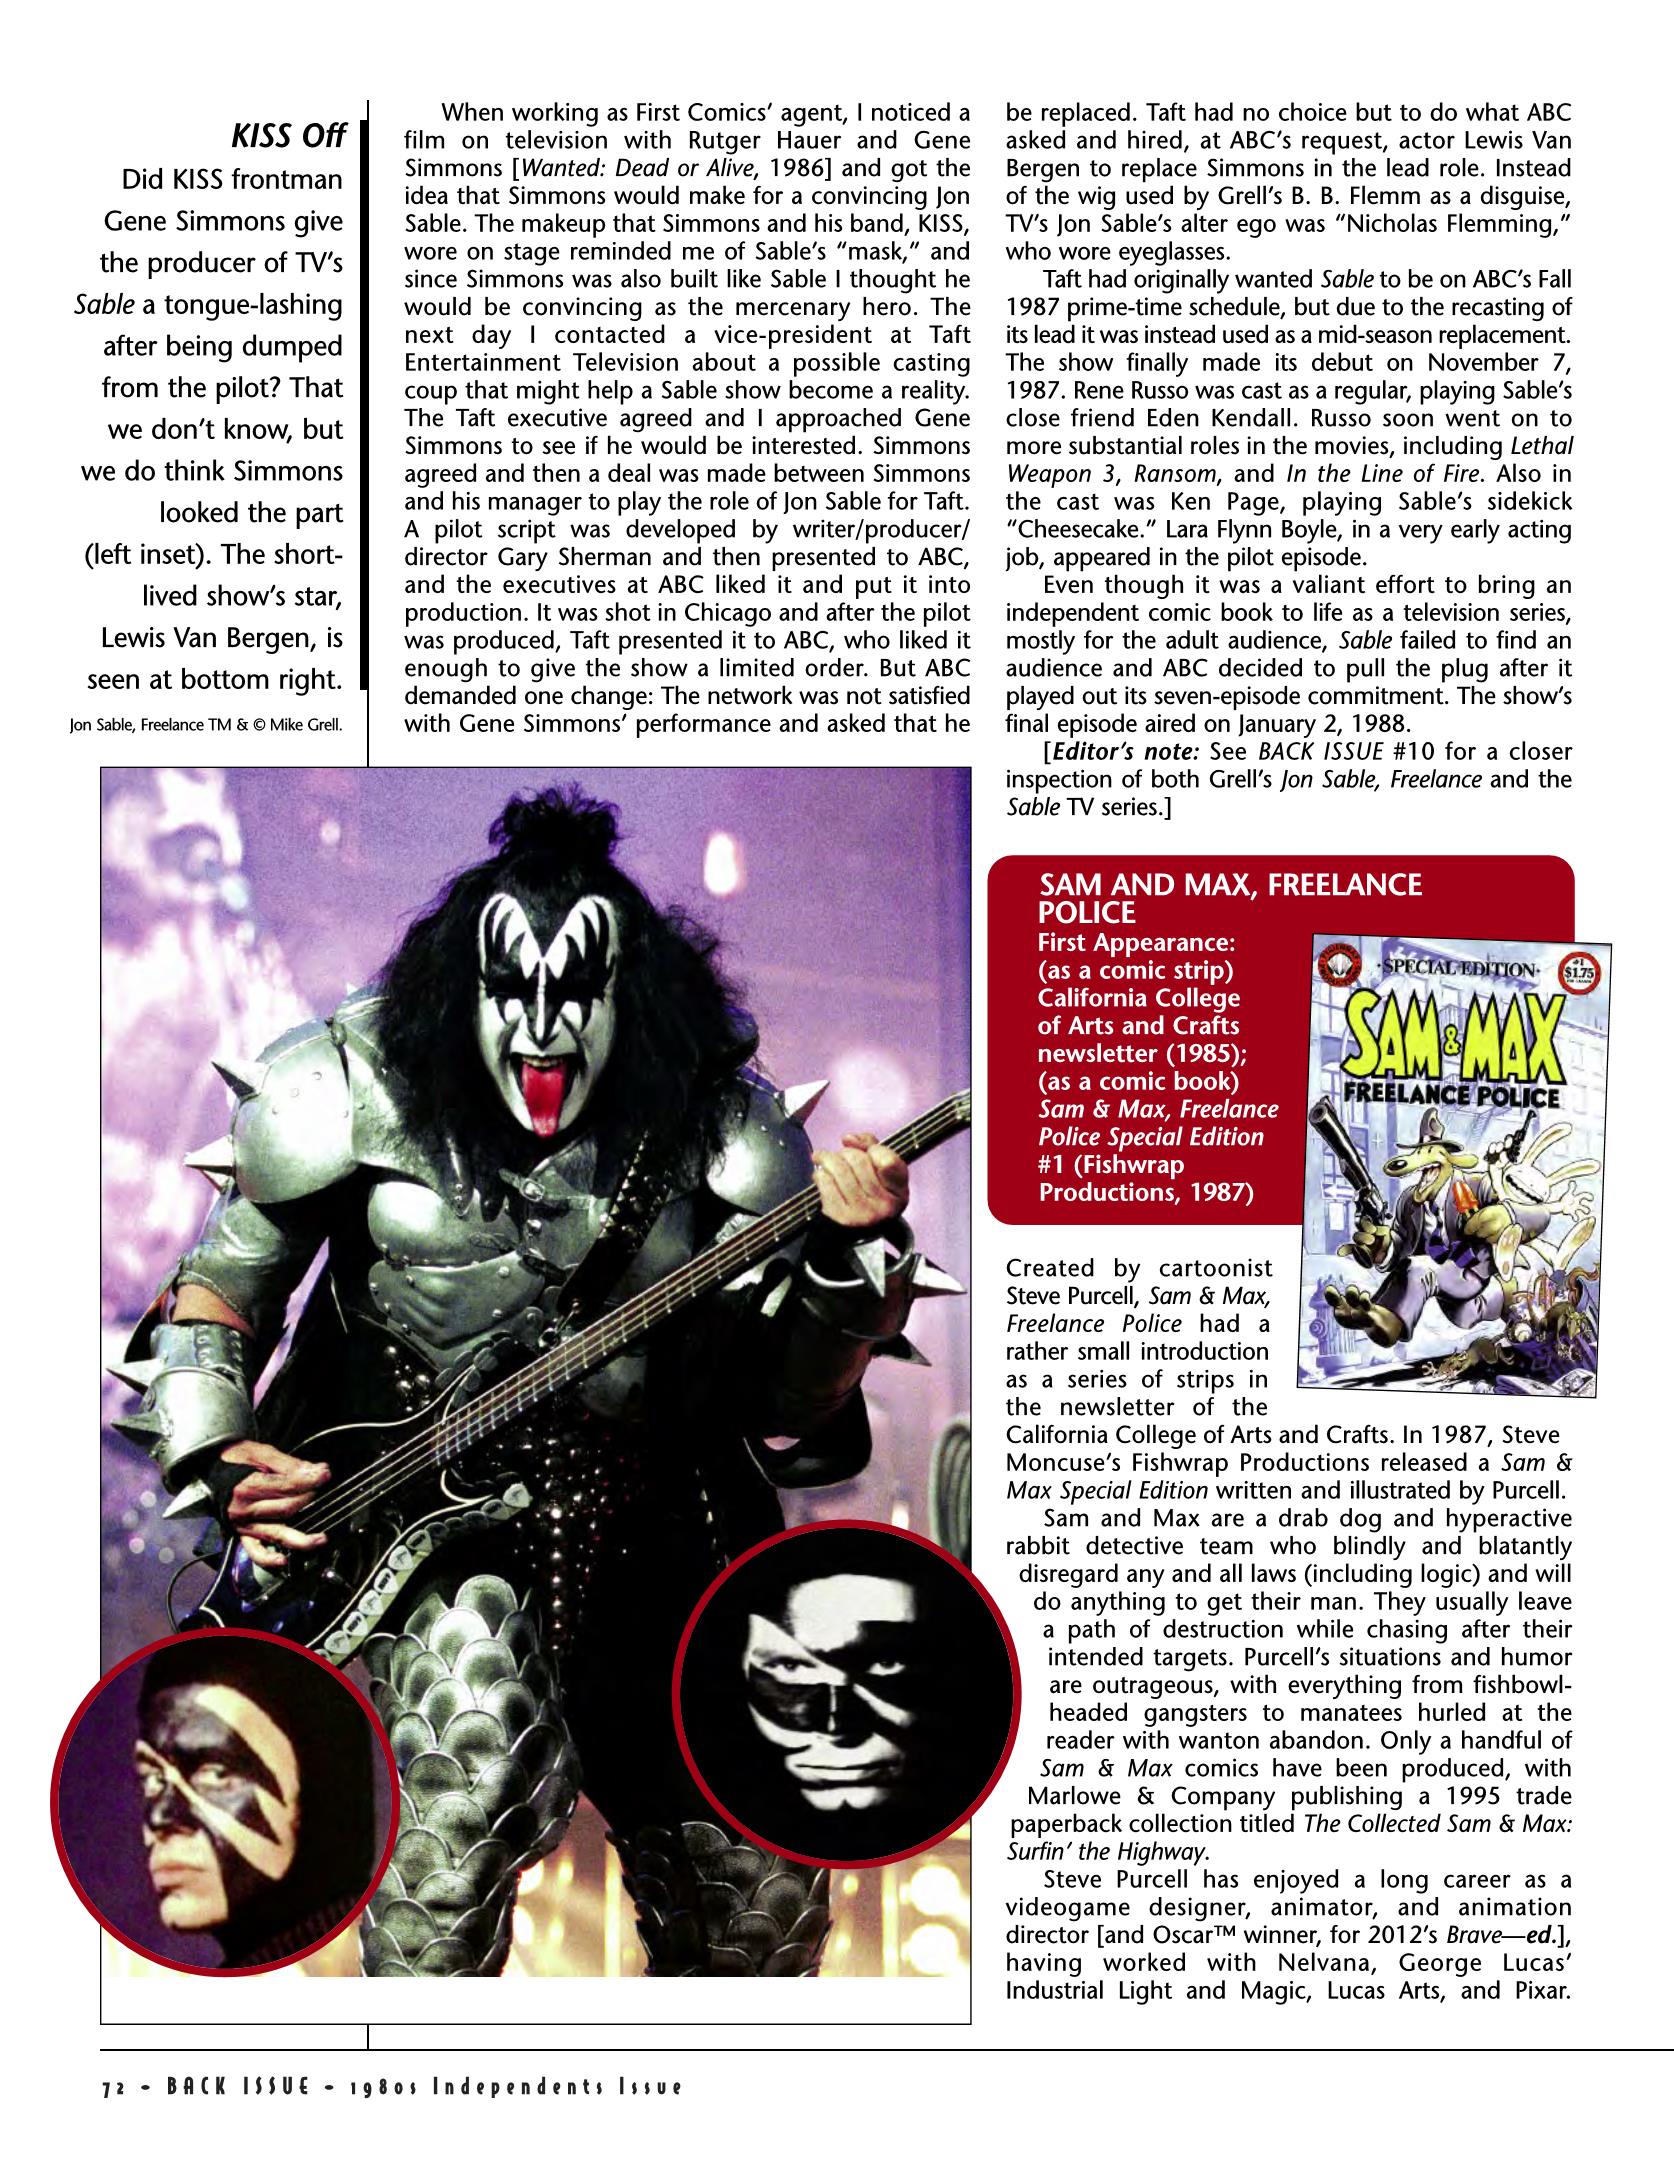 Read online Back Issue comic -  Issue #75 - 72